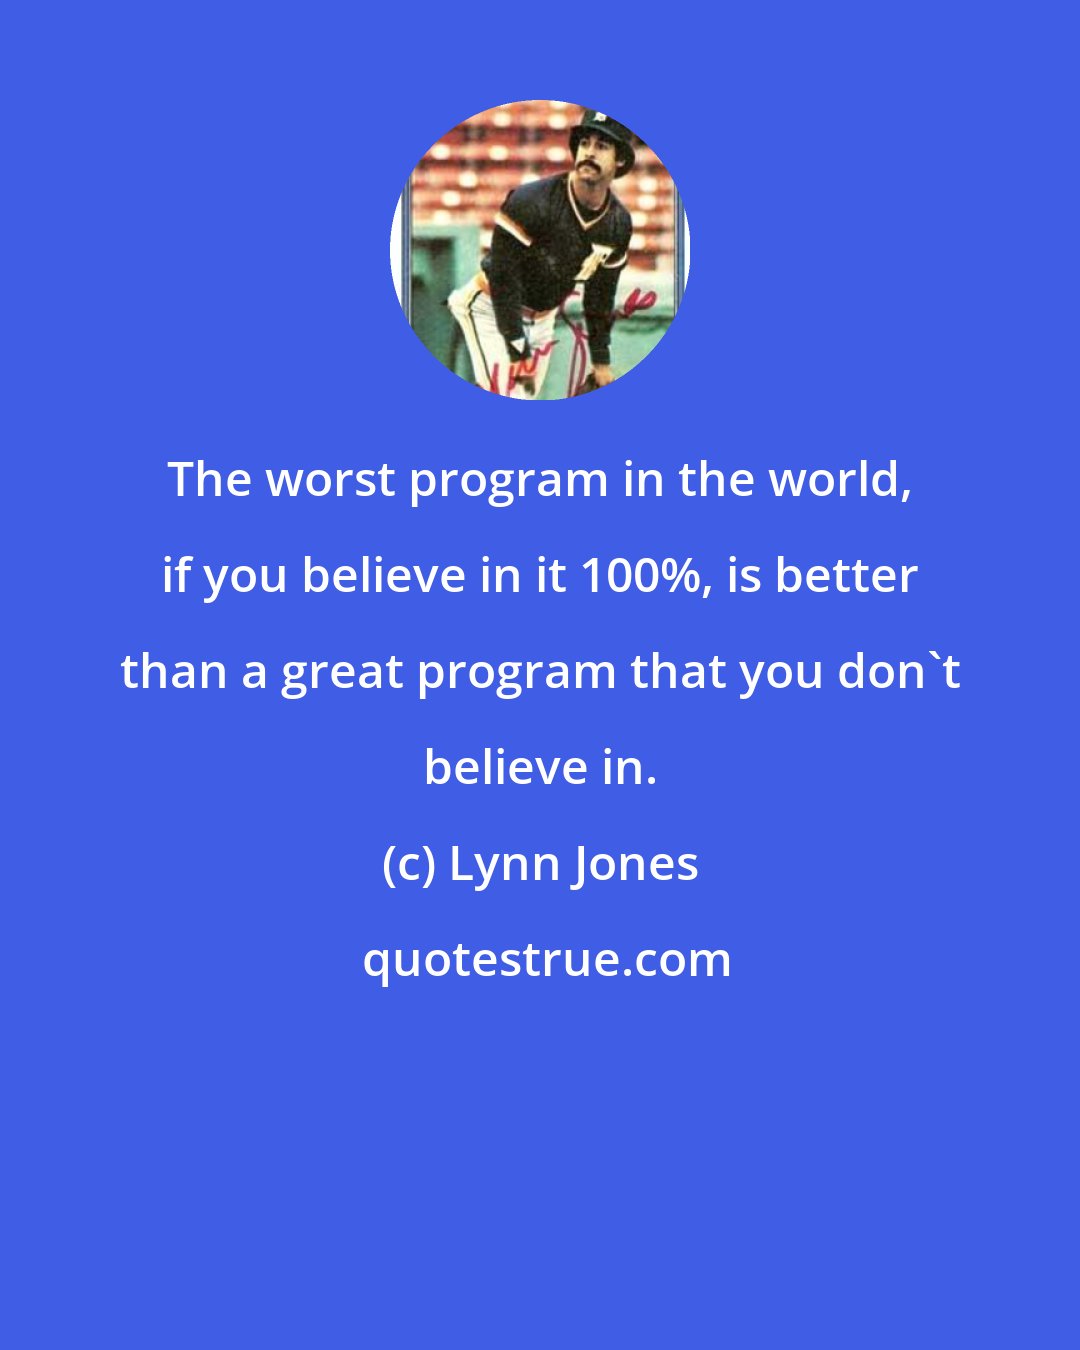 Lynn Jones: The worst program in the world, if you believe in it 100%, is better than a great program that you don't believe in.